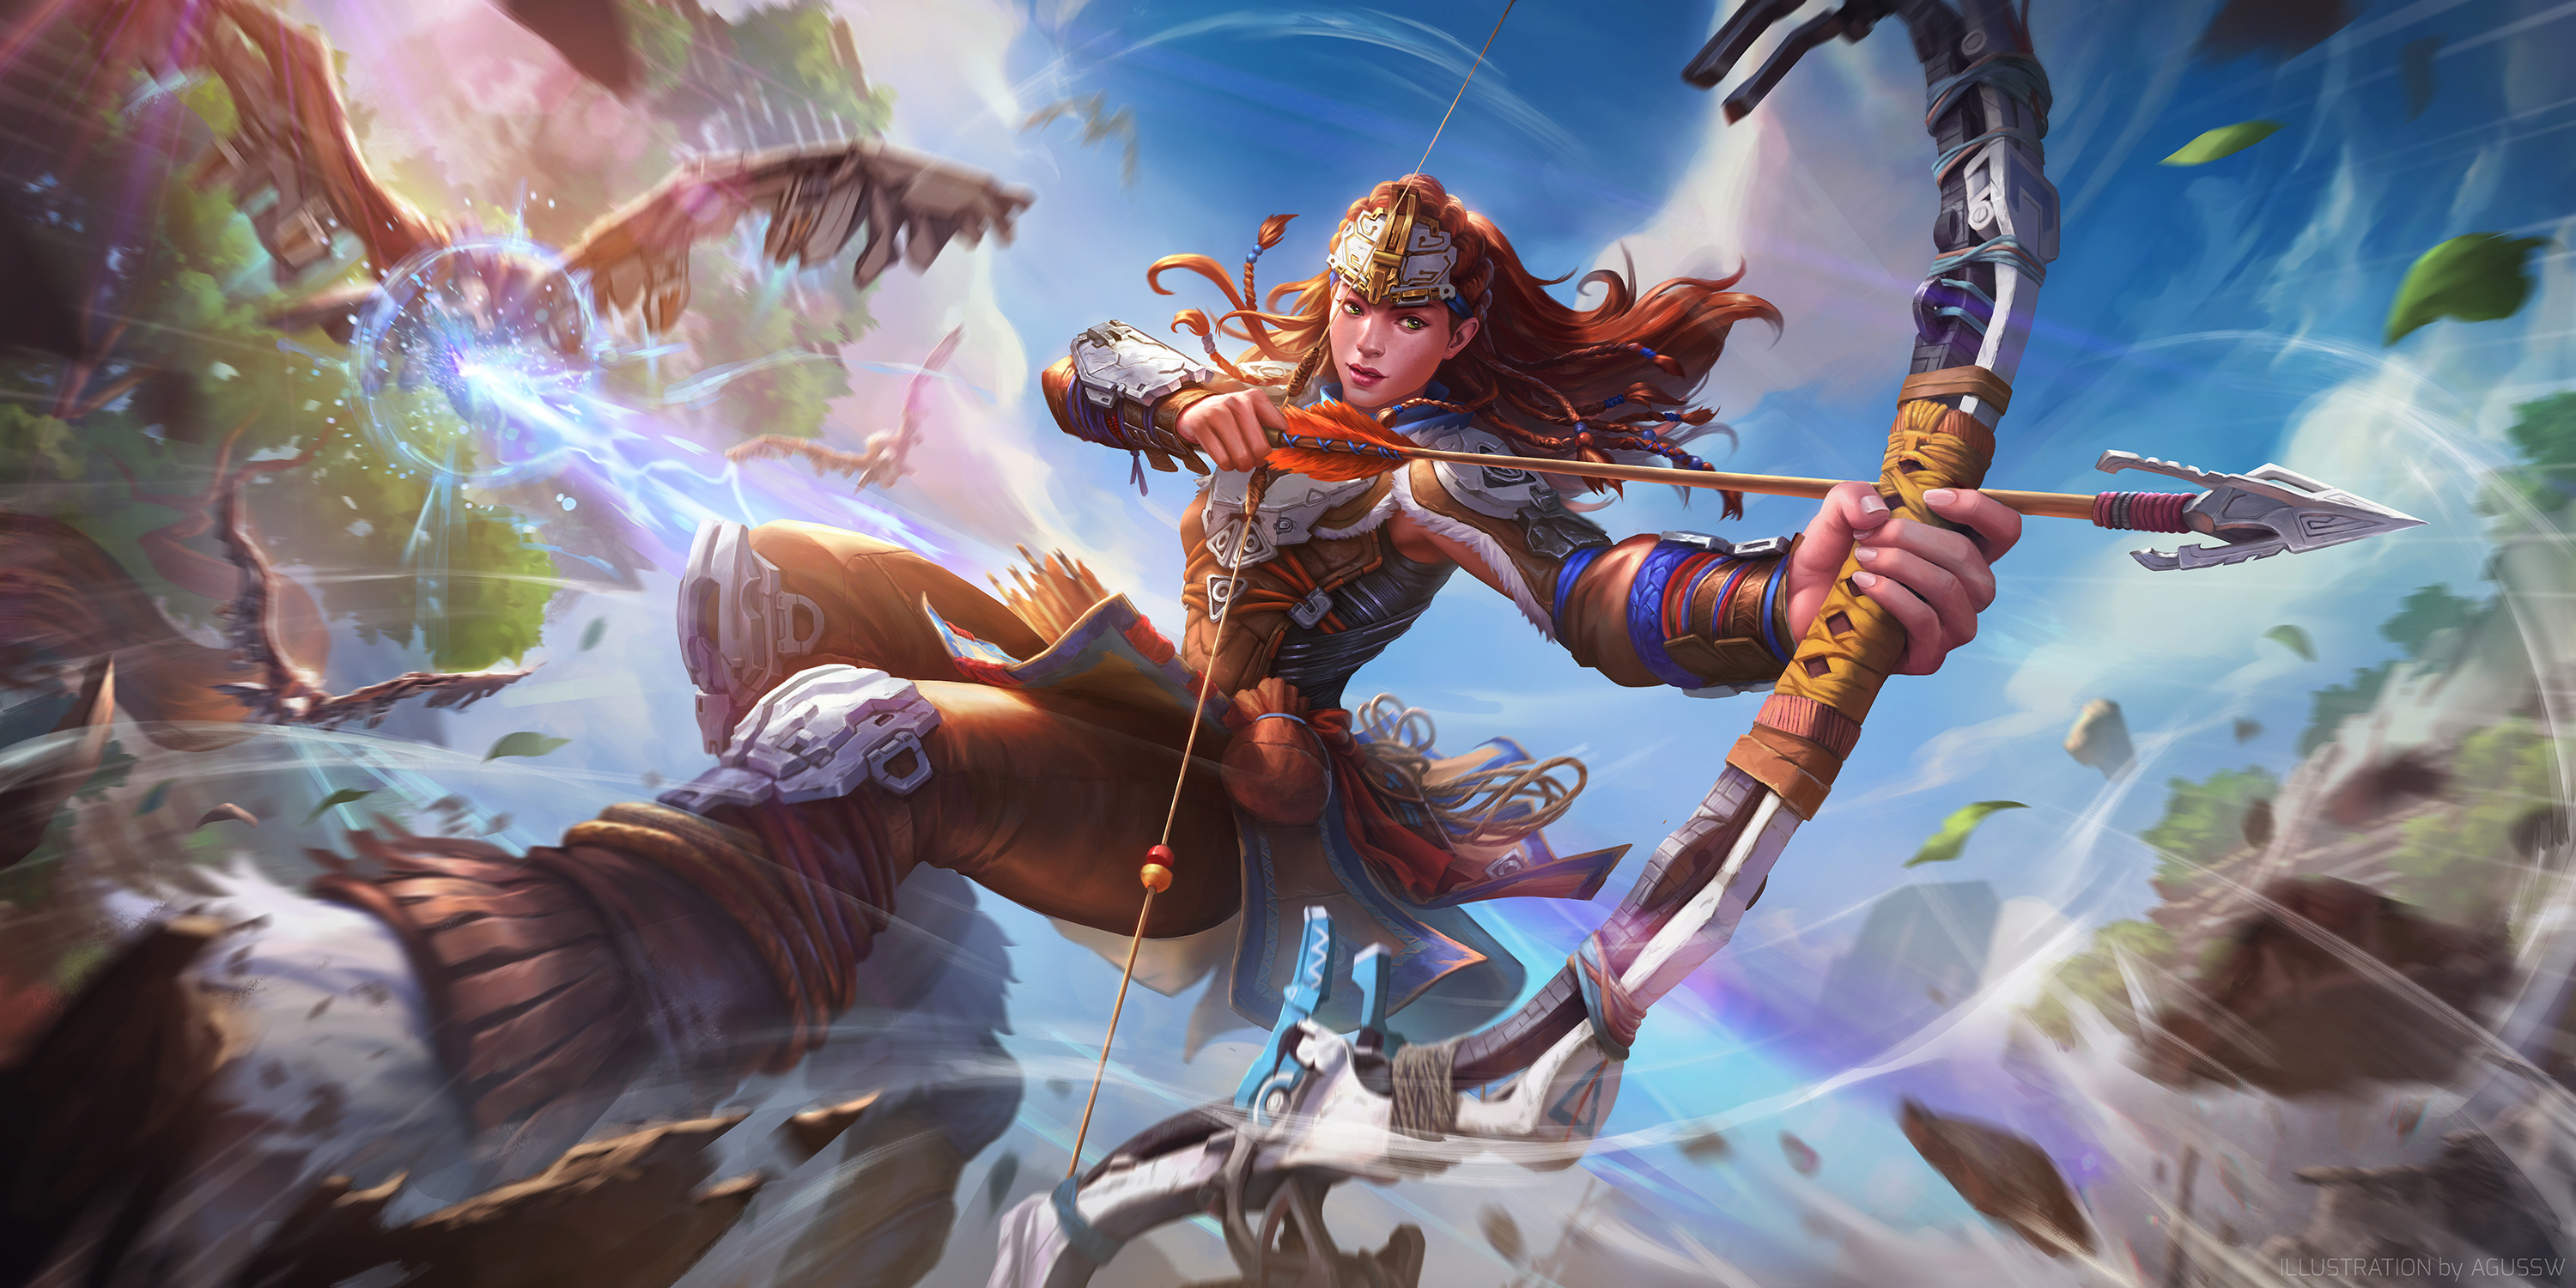 General 3000x1500 Agussw digital art illustration artwork fan art video game art video games fighting Aloy Horizon Forbidden West bow video game characters fantasy girl video game girls